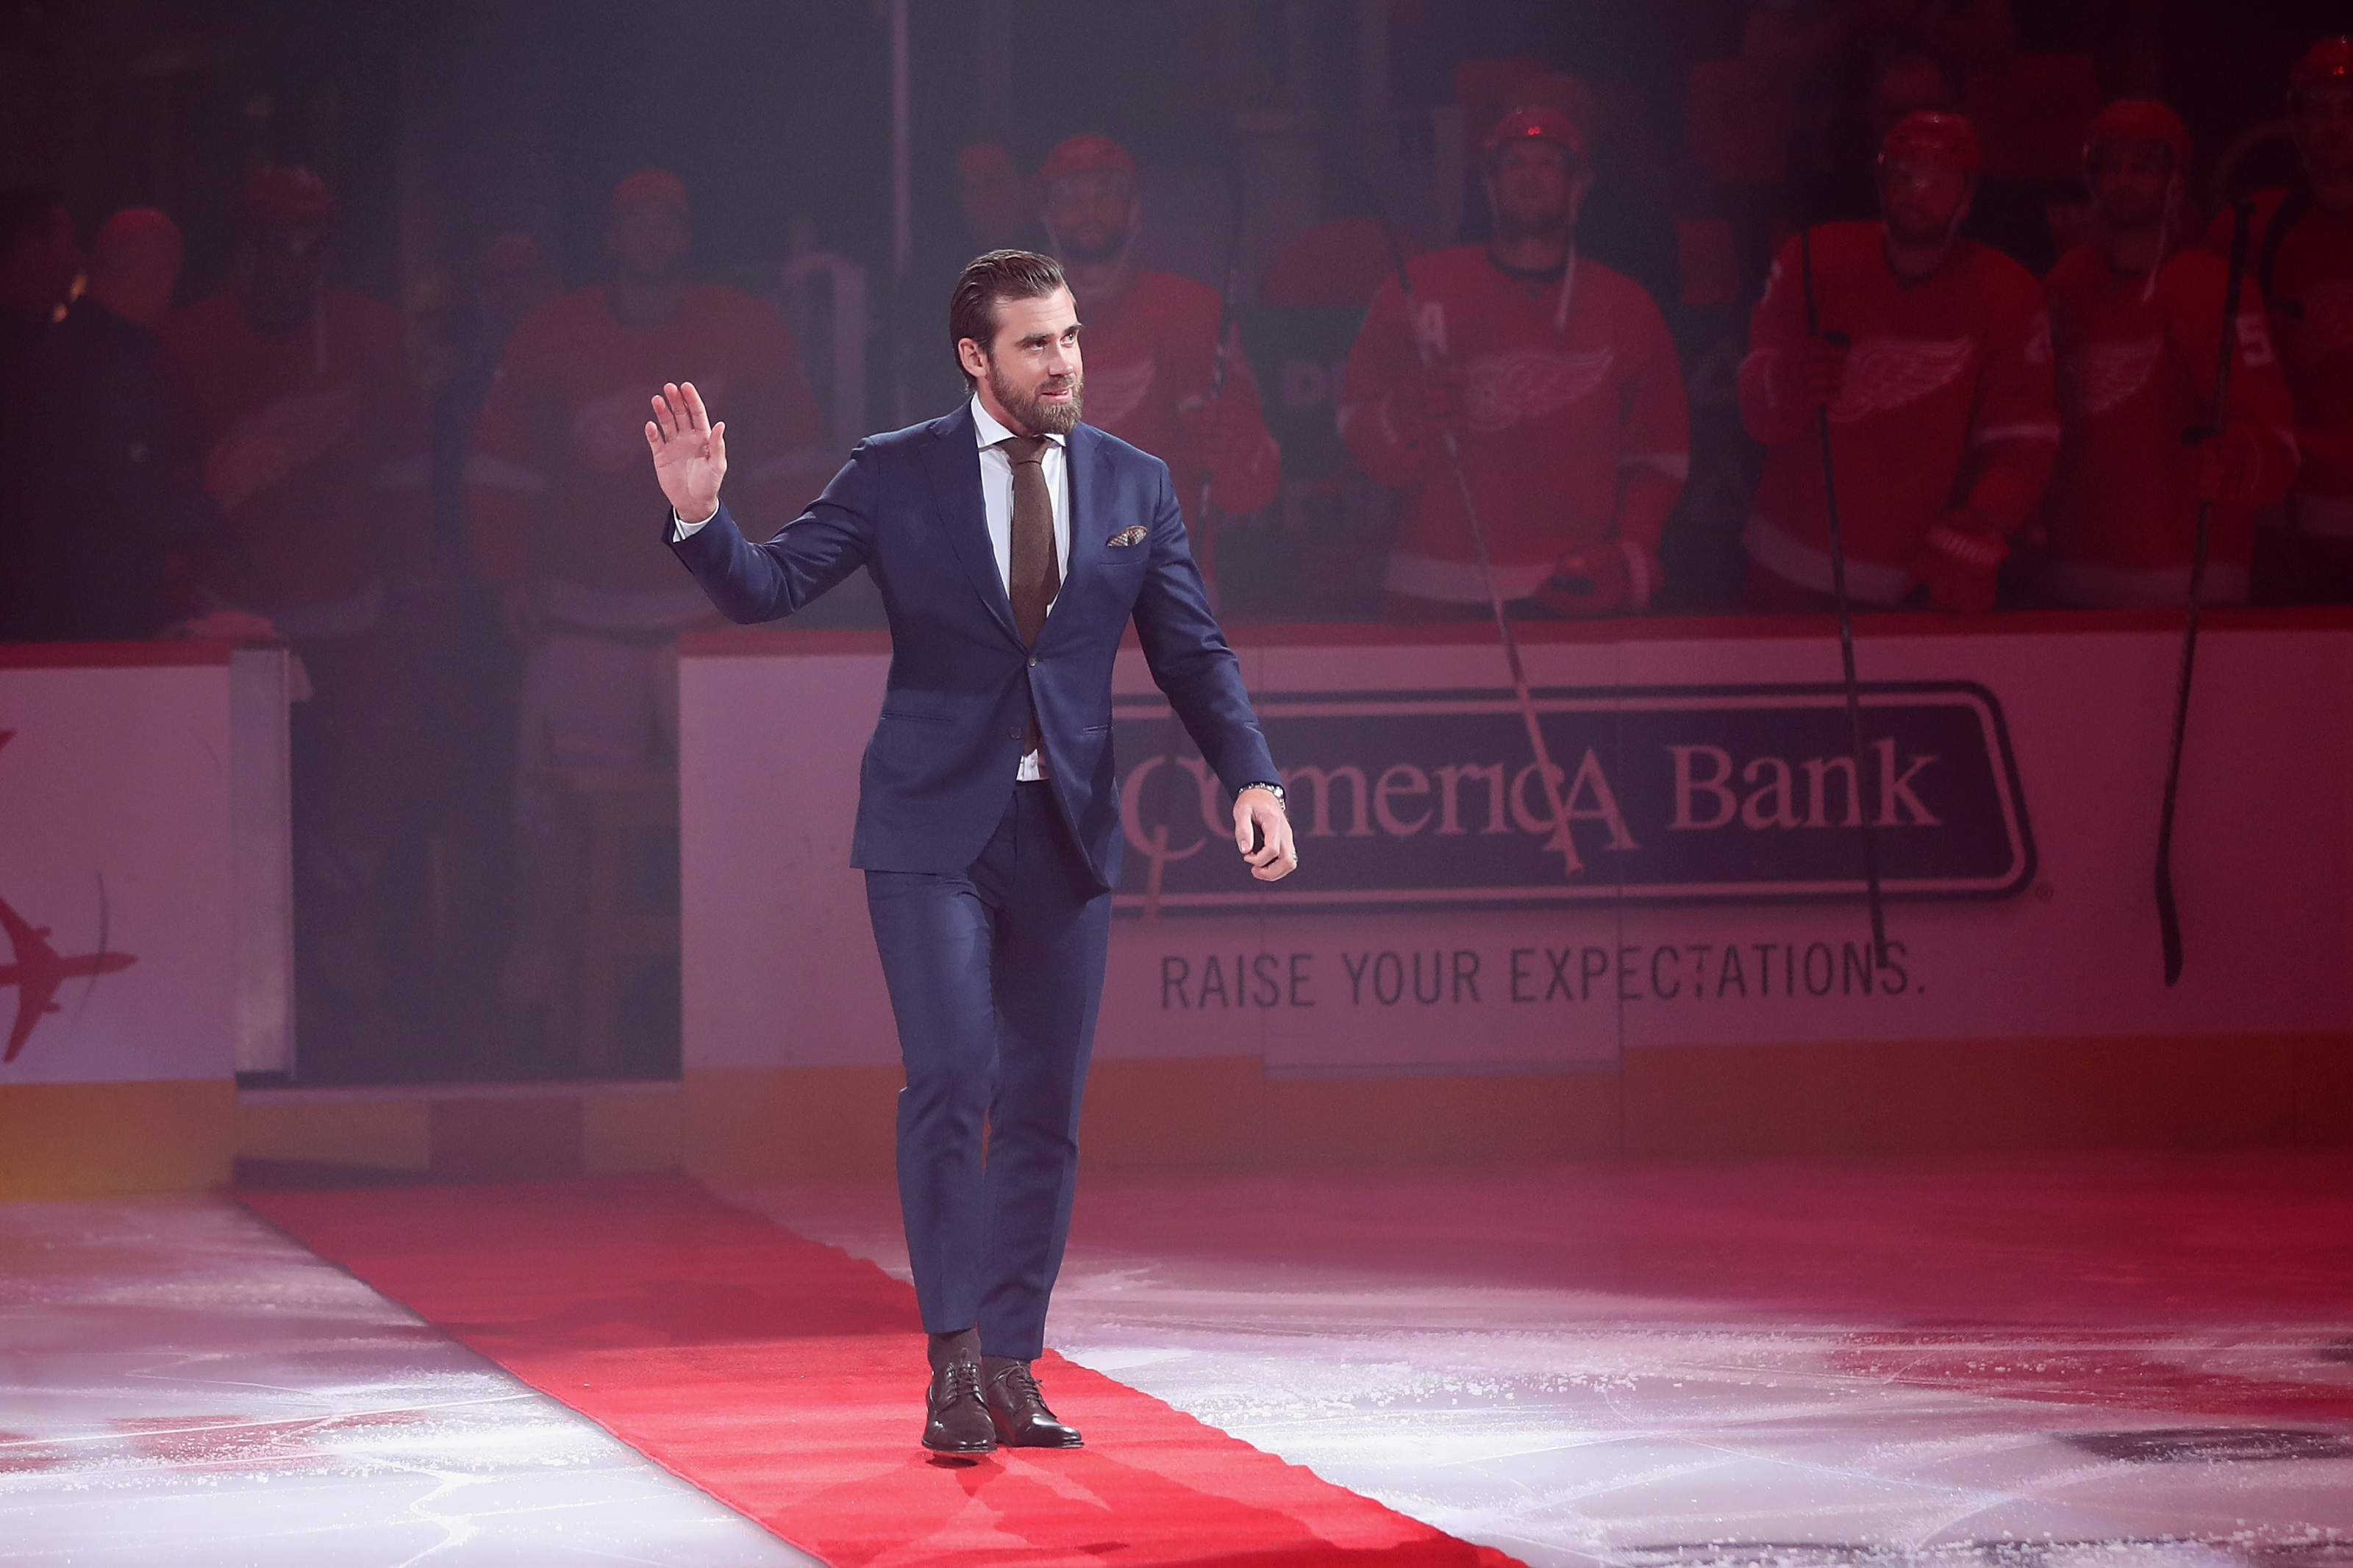 Is This The End Of The Henrik Zetterberg Era?